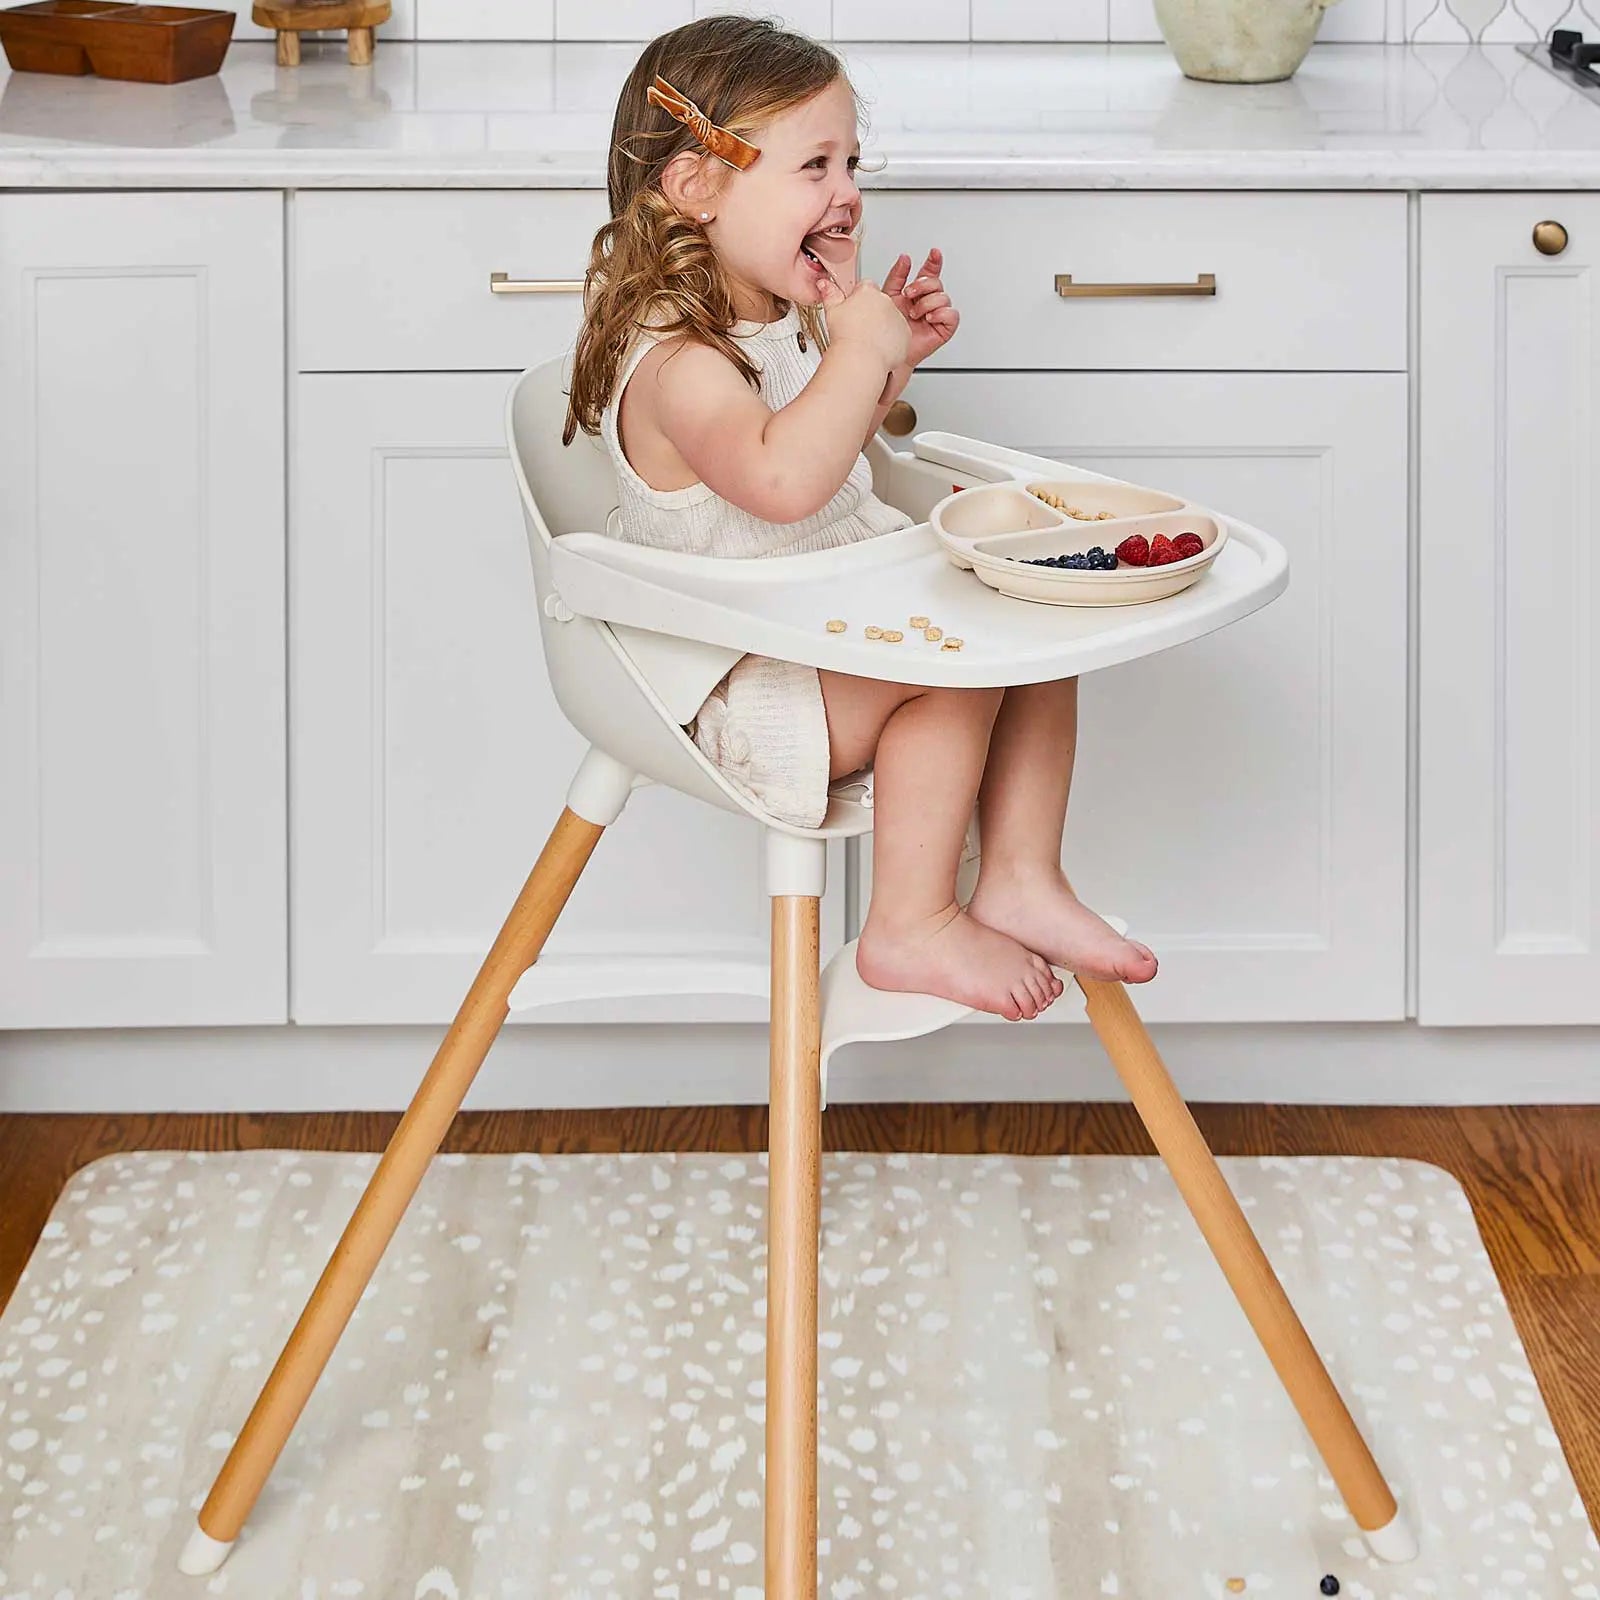 Fawn brown and white animal print high chair mat shown in a kitchen under a highchair with toddler girl sitting in the chair smiling and eating fruit